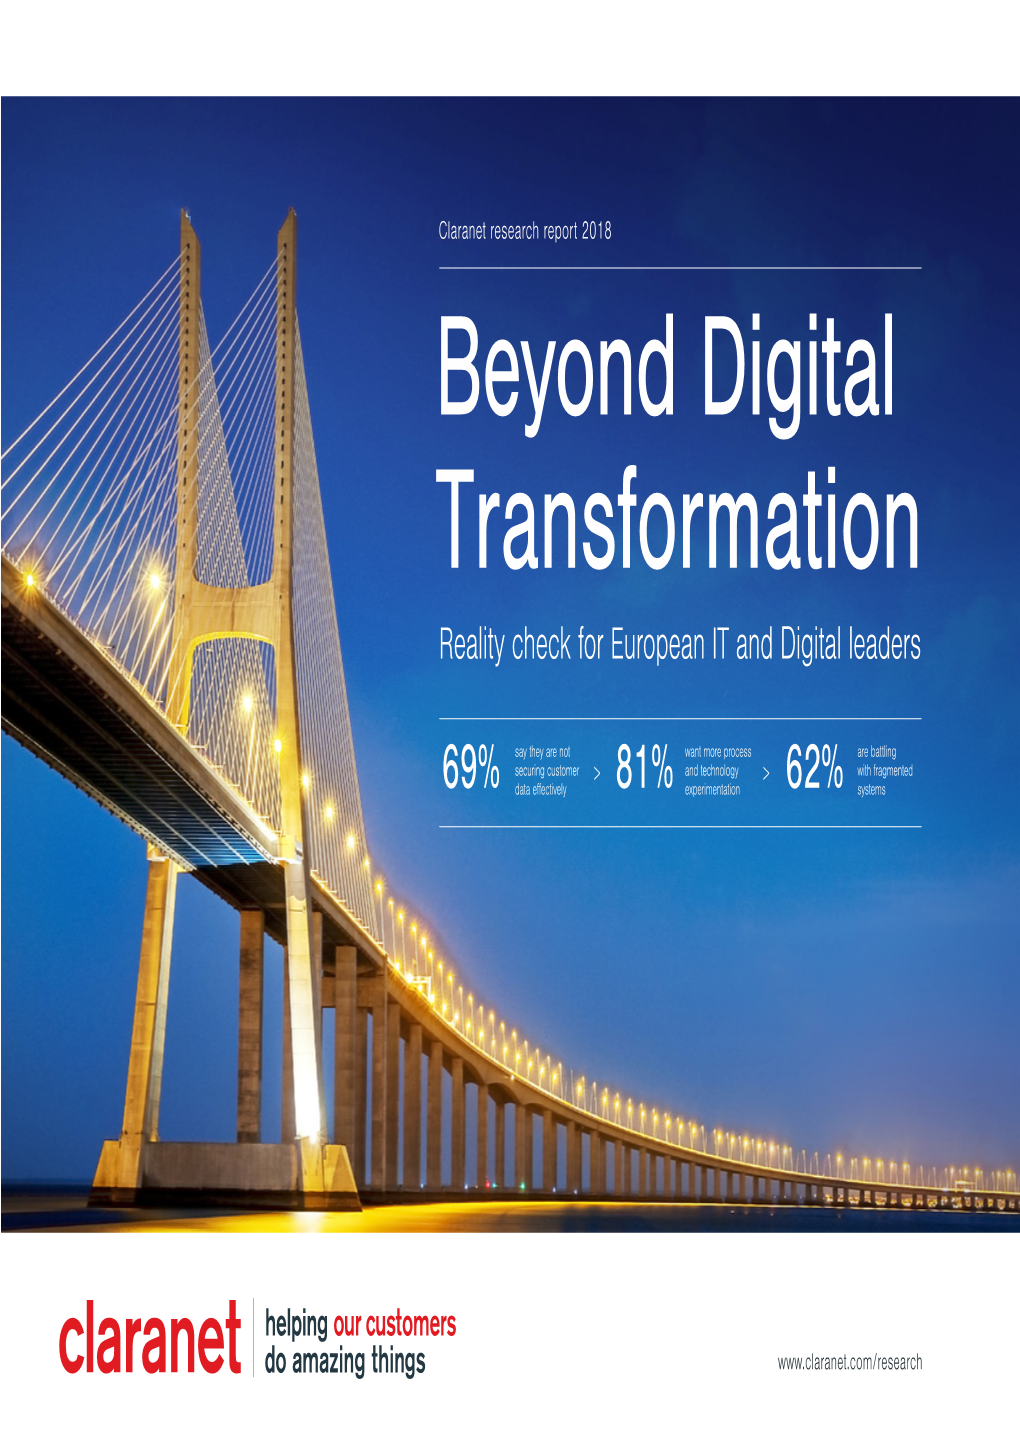 Beyond Digital Transformation Reality Check for European IT and Digital Leaders